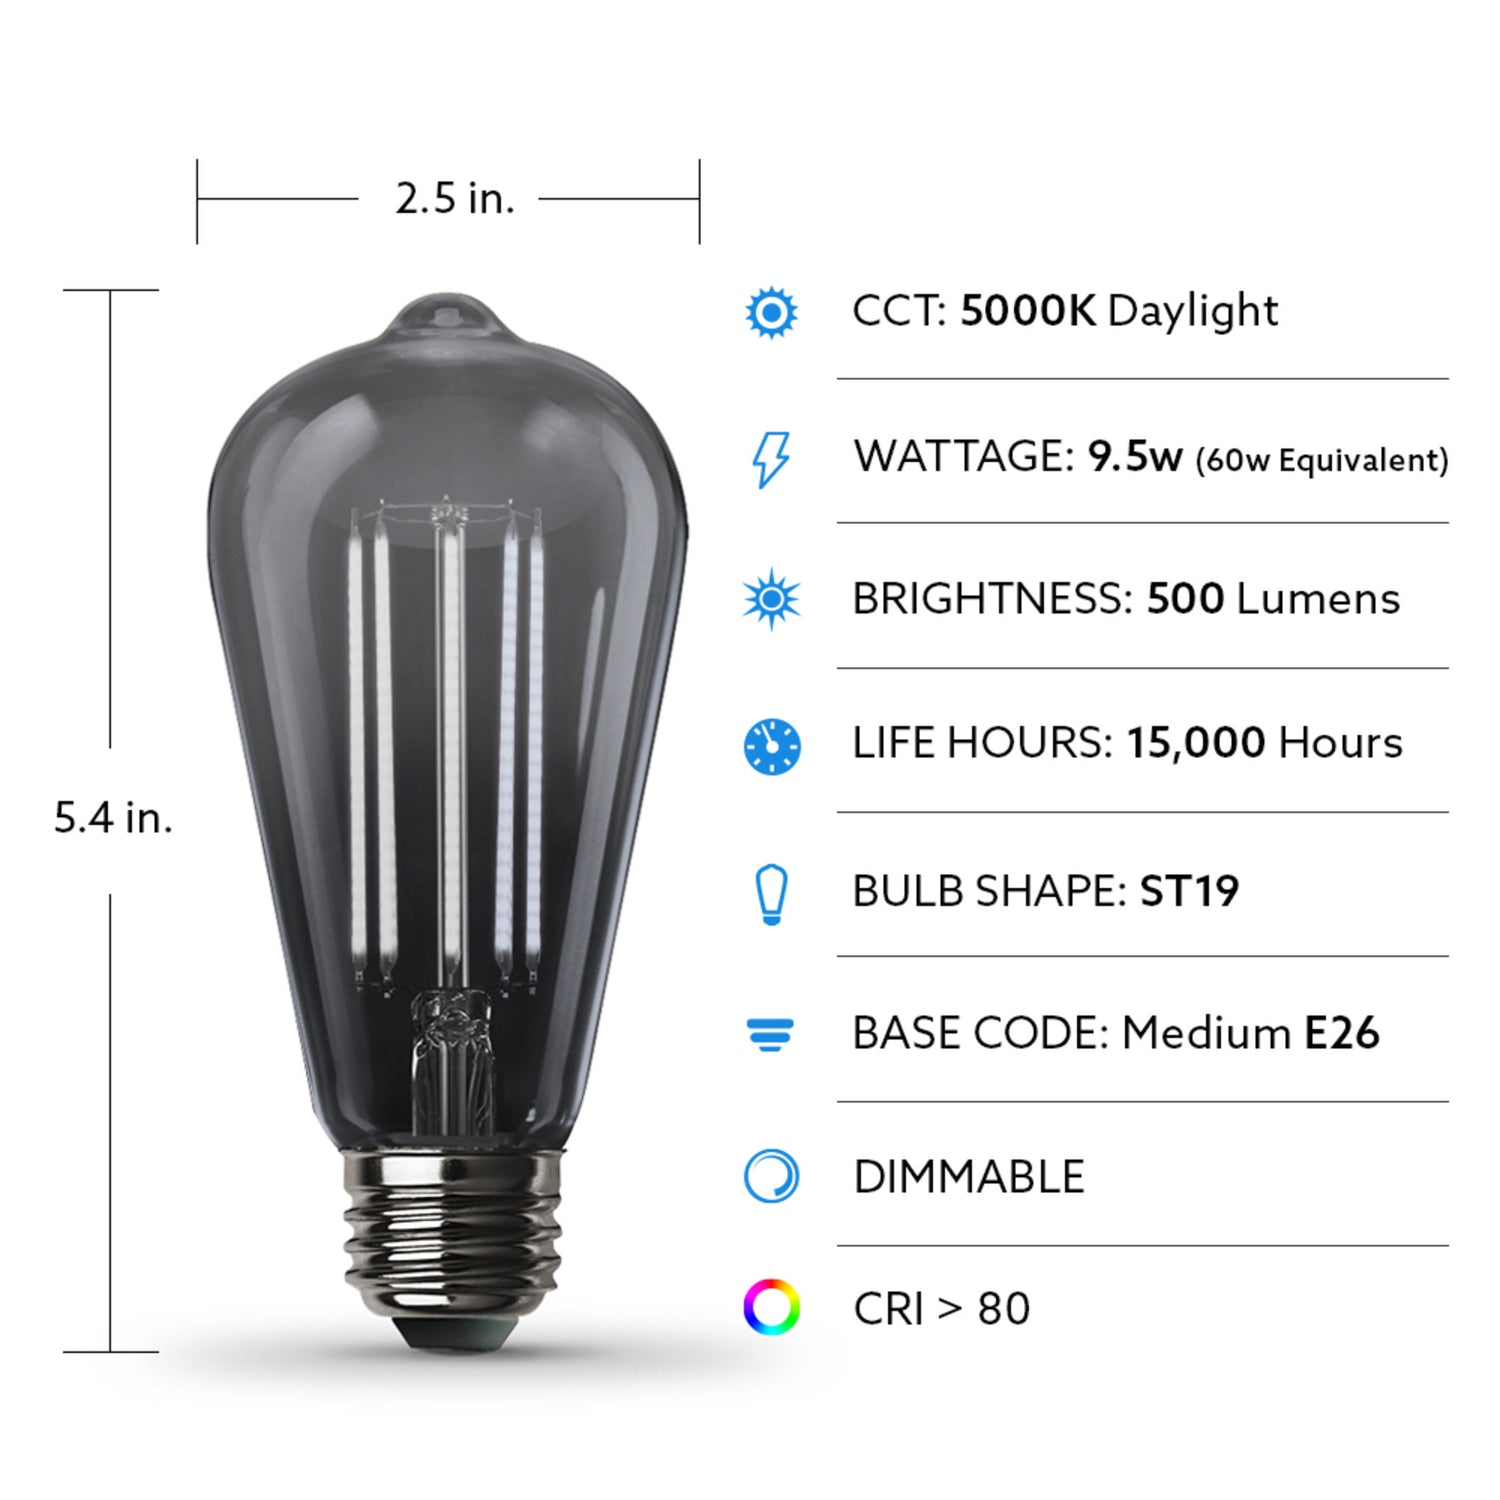 9.5W (60W Replacement) ST19 E26 Dimmable Straight Filament Smoke Glass Vintage Edison LED Light Bulb, Daylight